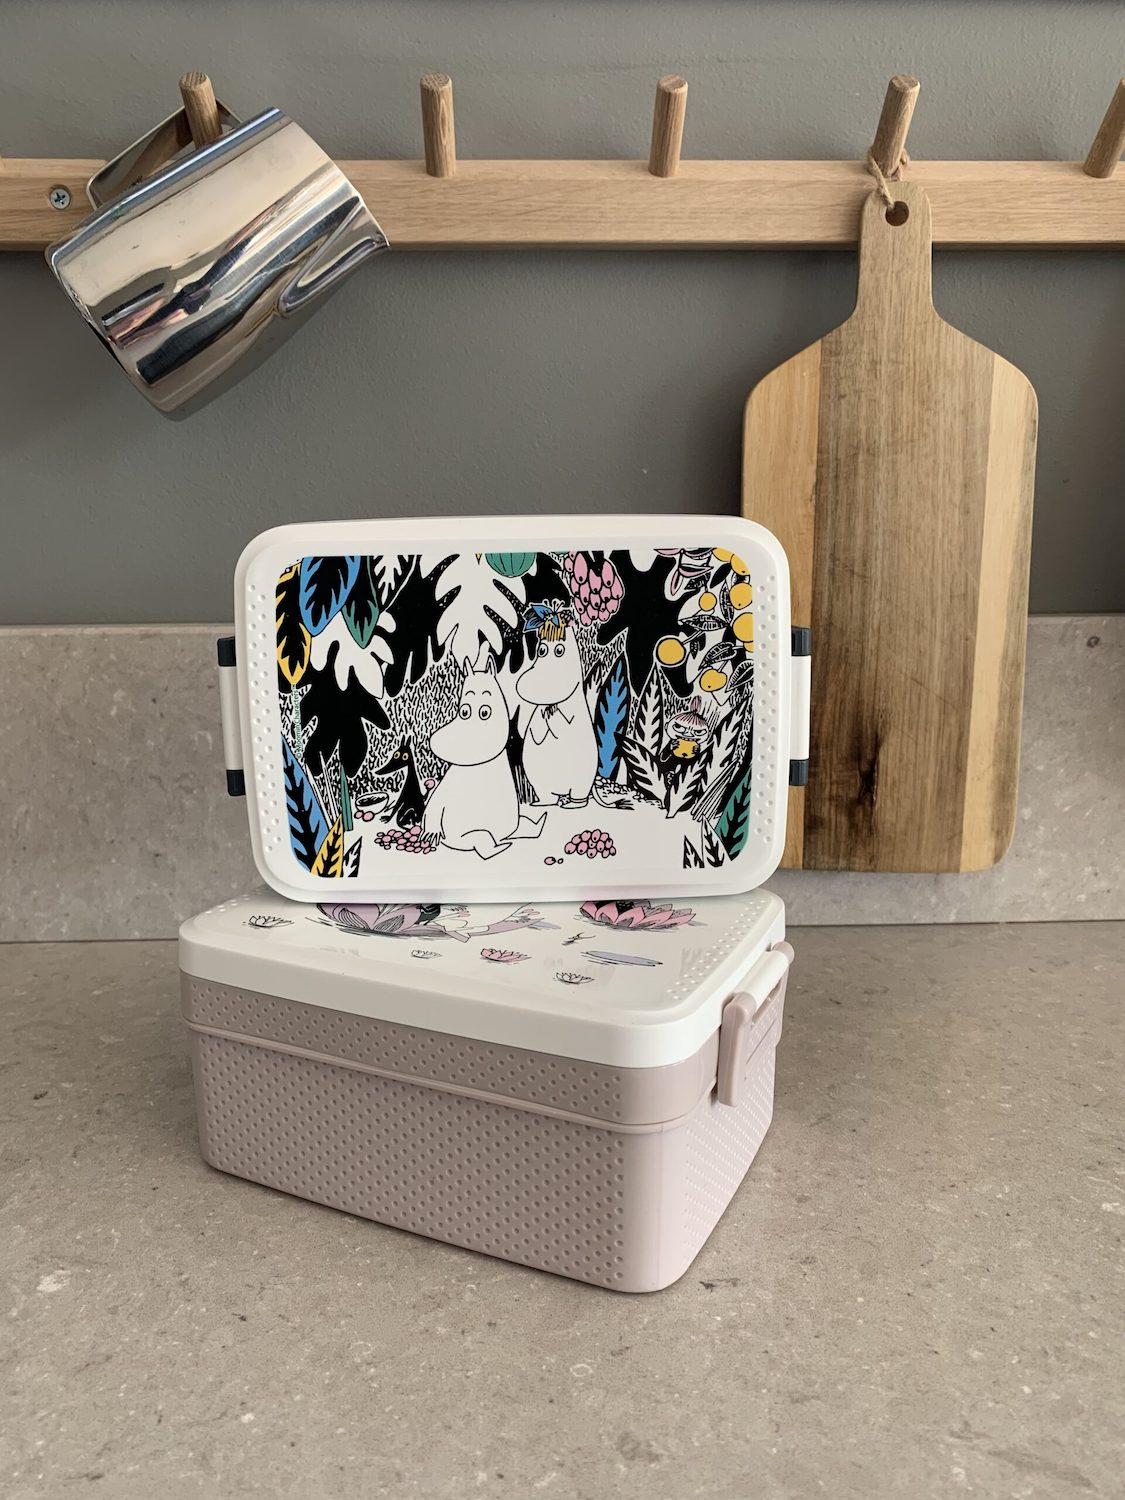 Moomin lunch box on kitchen counter